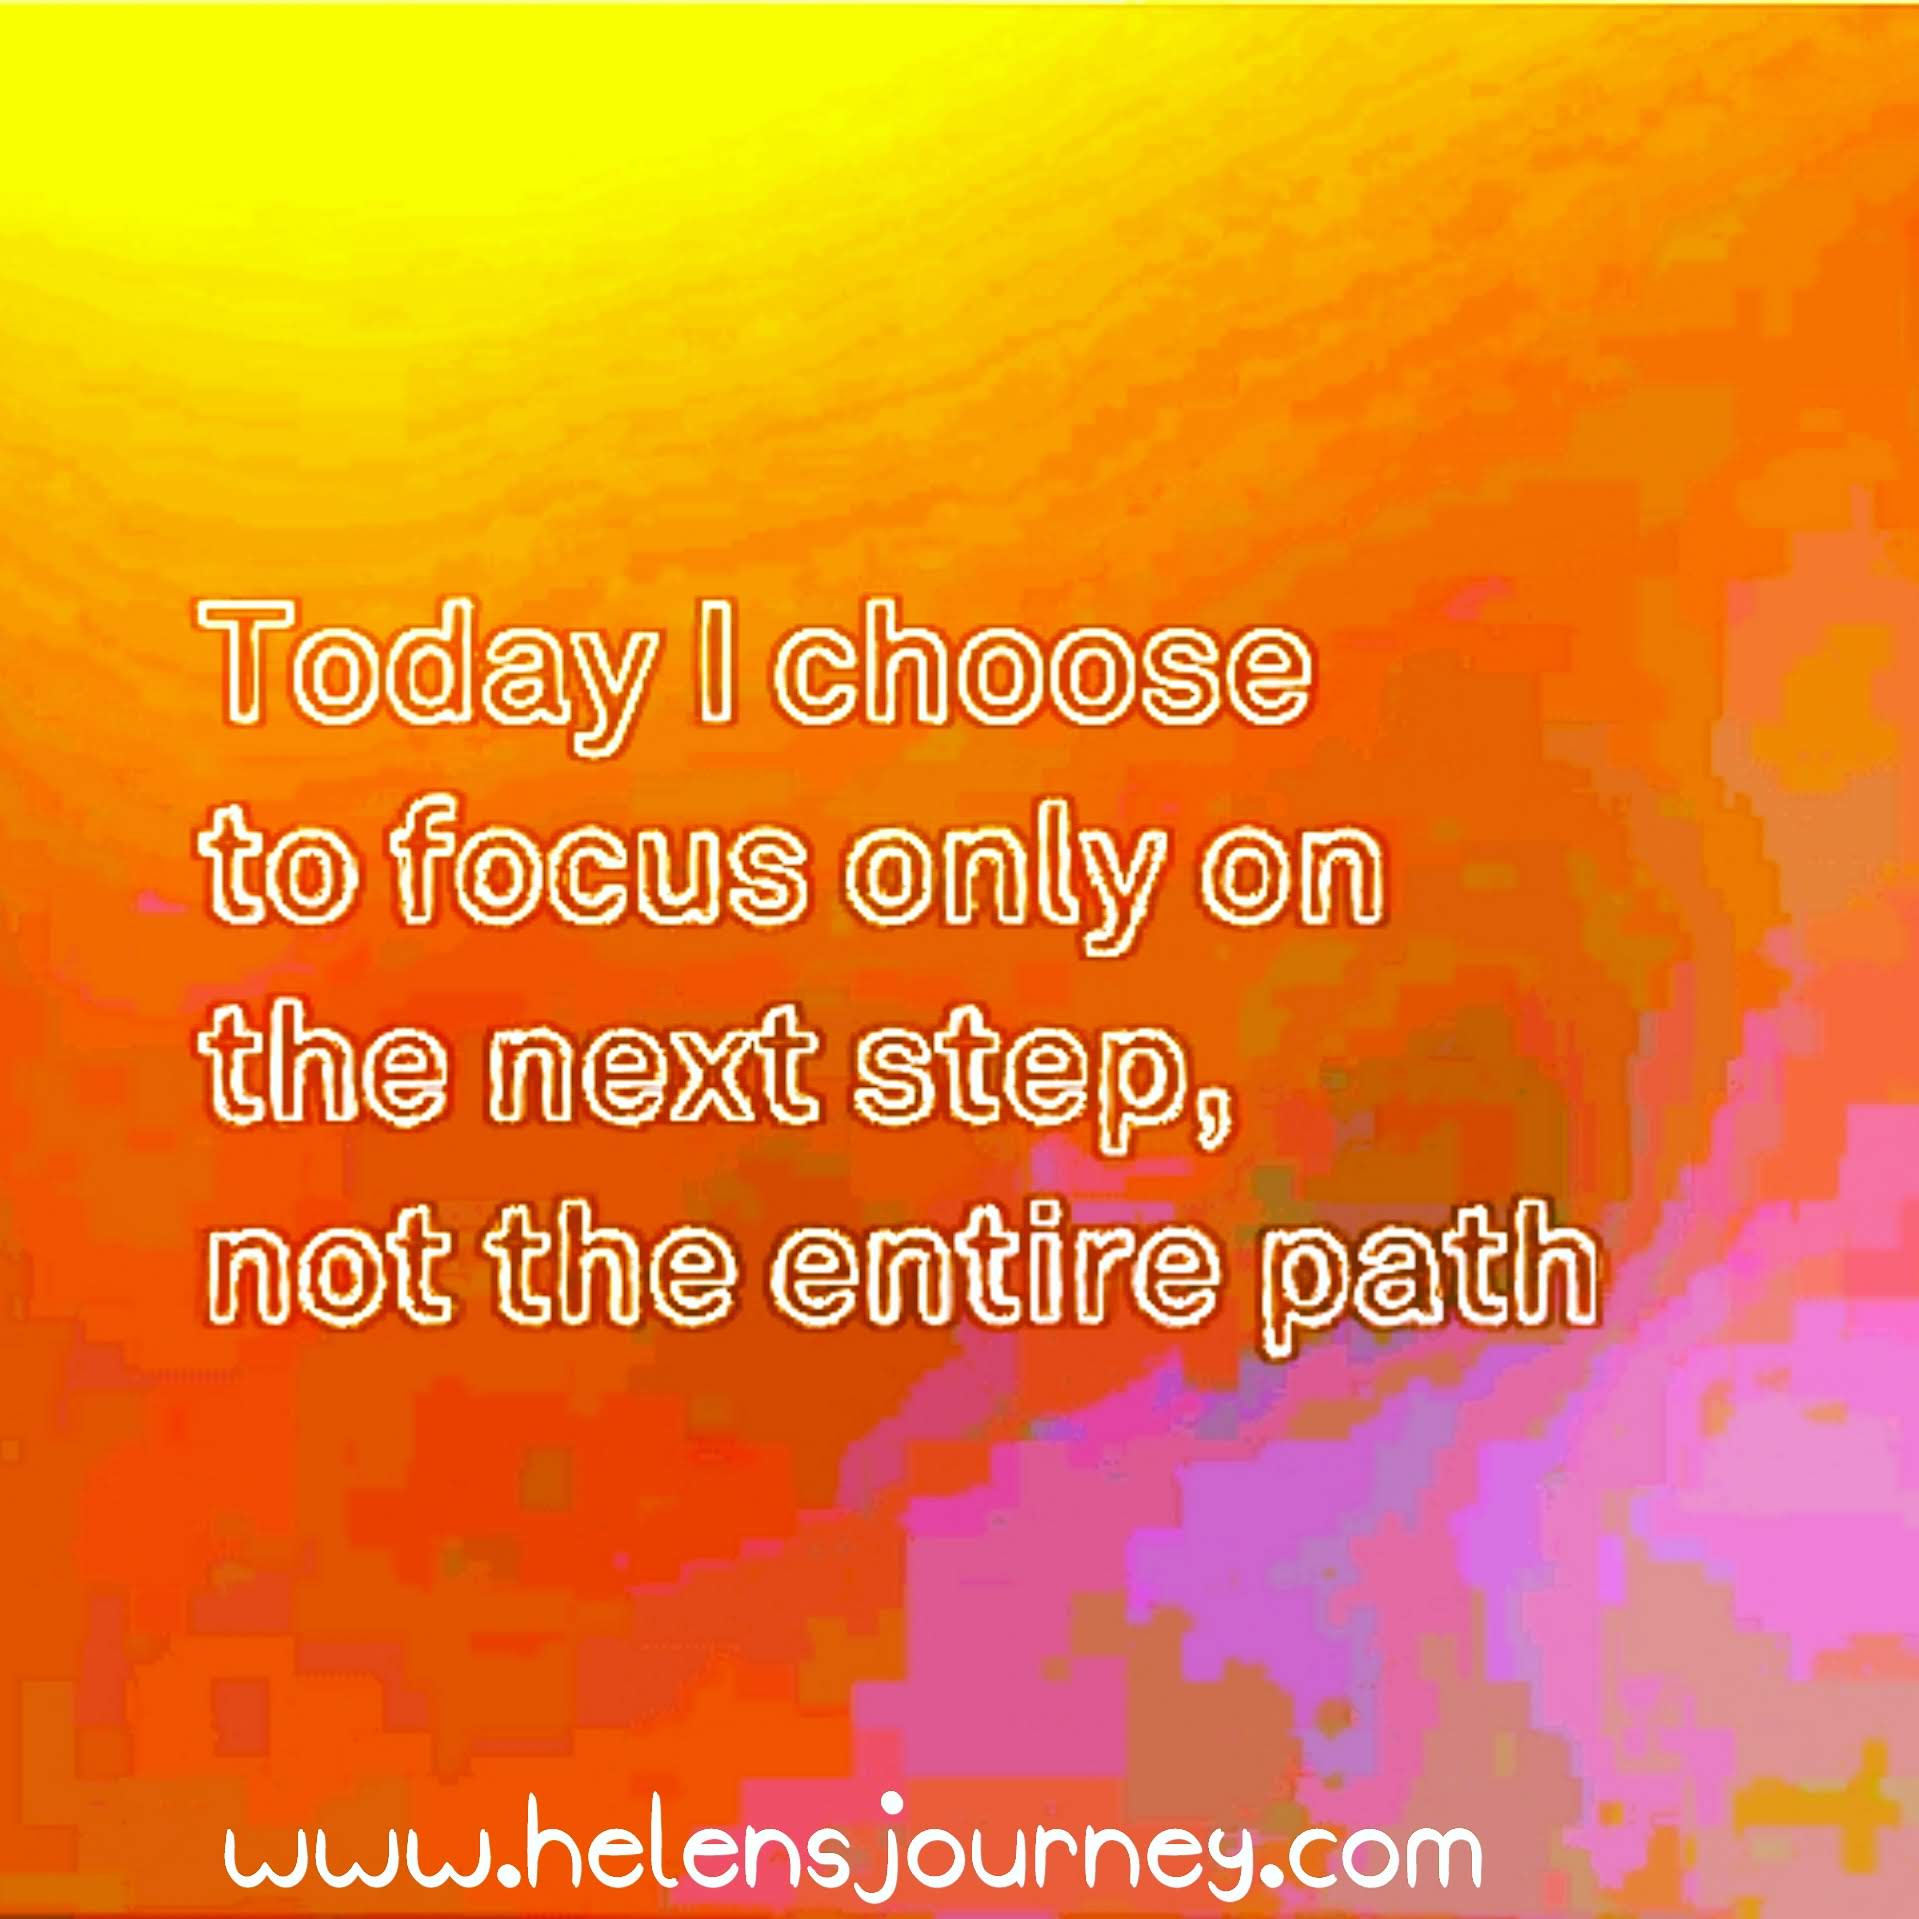 today i choose to focus only on the next step not the entire path. survival tips for when life has you feeling overwhelmed